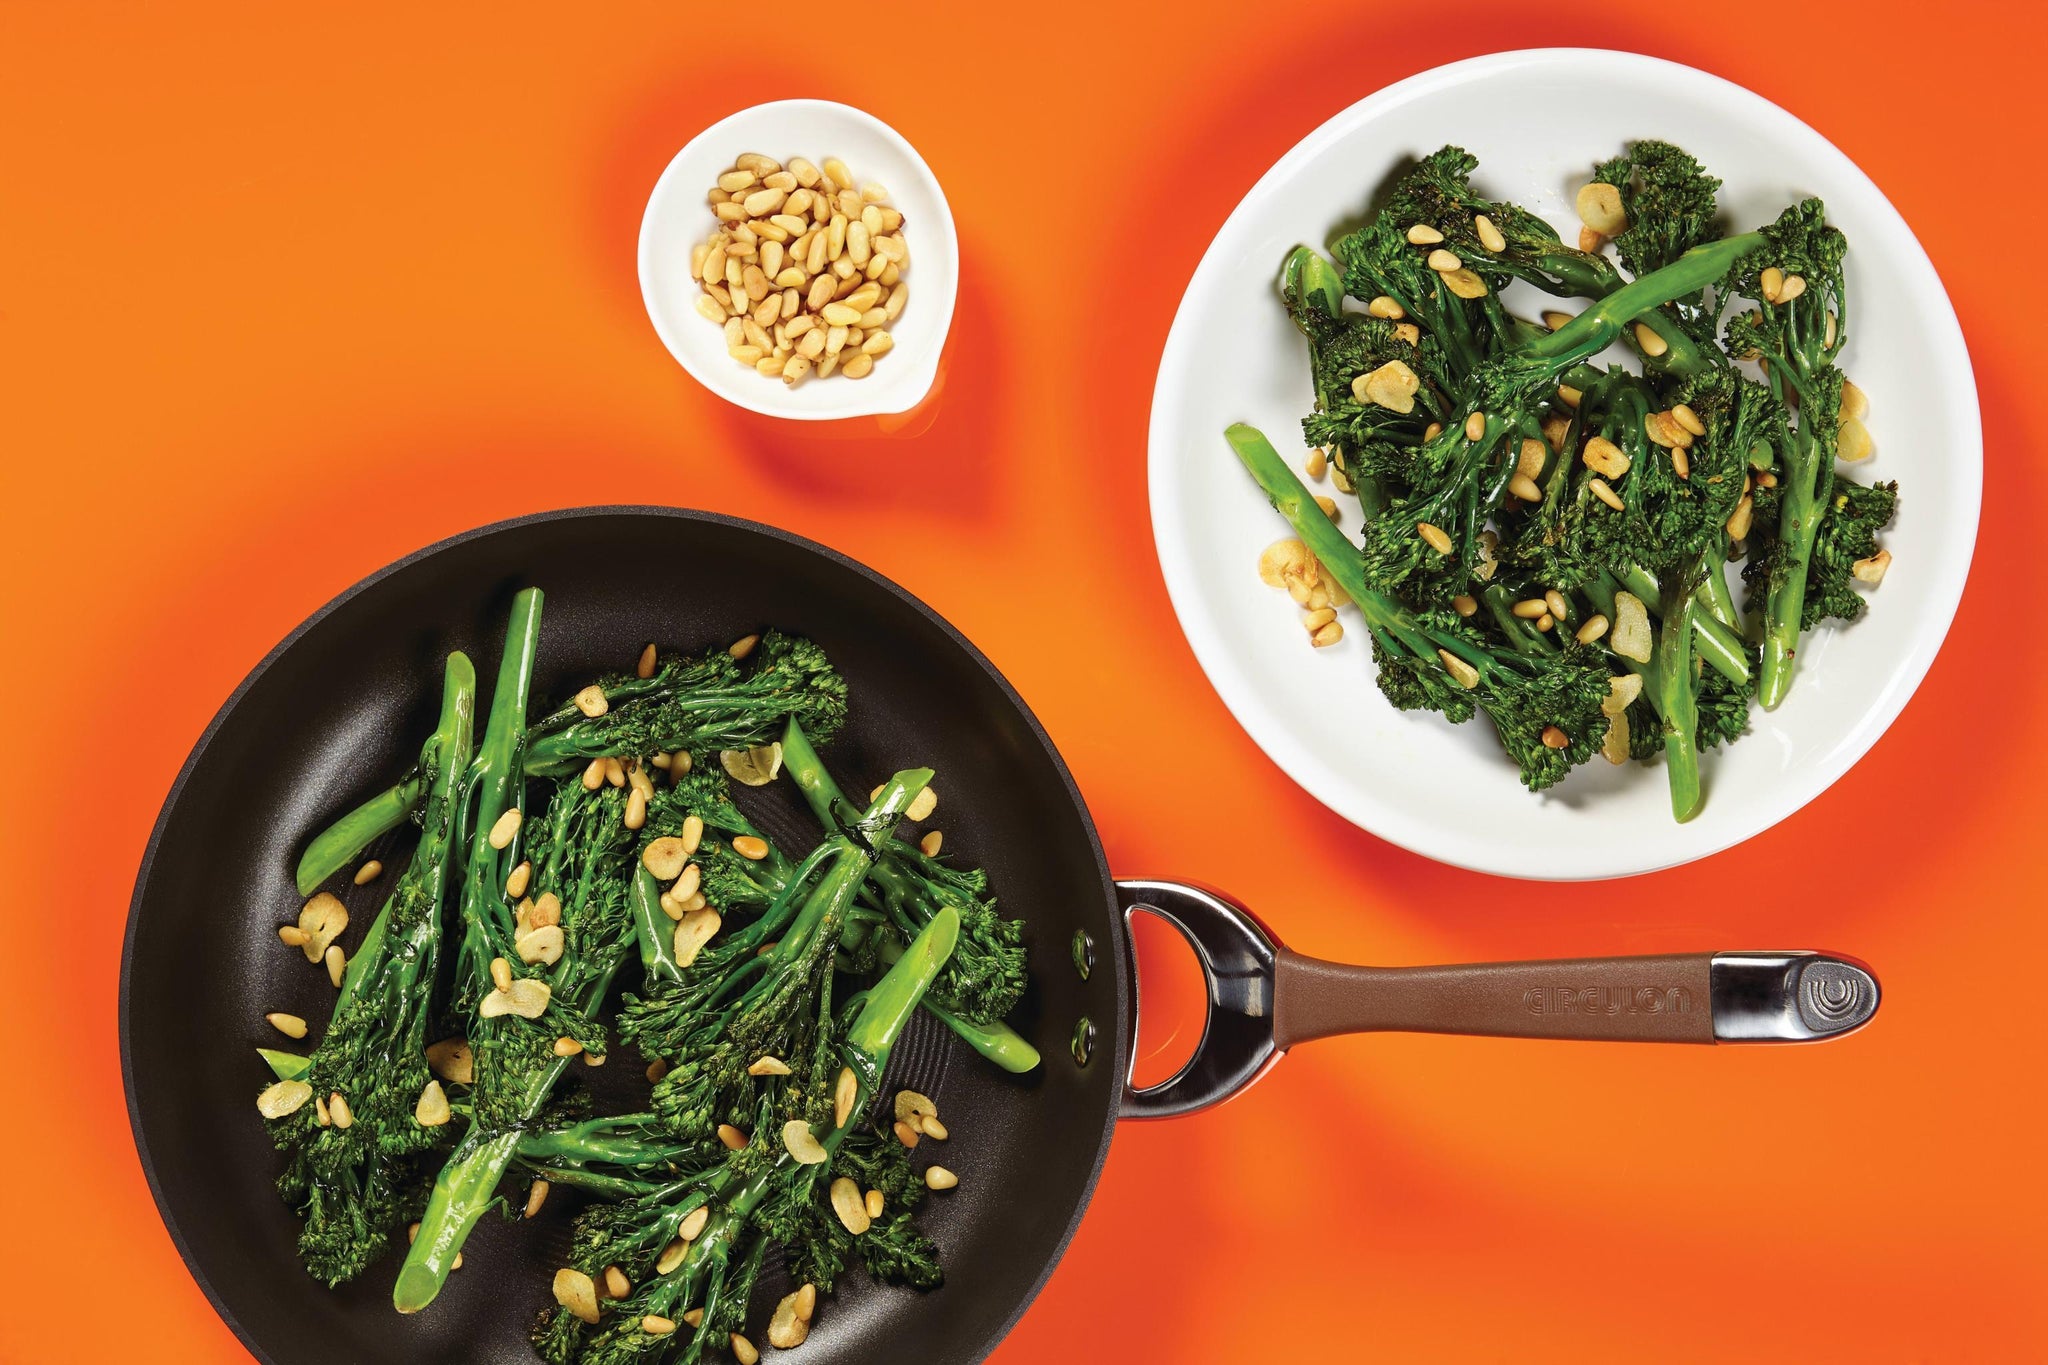 Broccolini with Pine Nuts and Golden Garlic Slivers